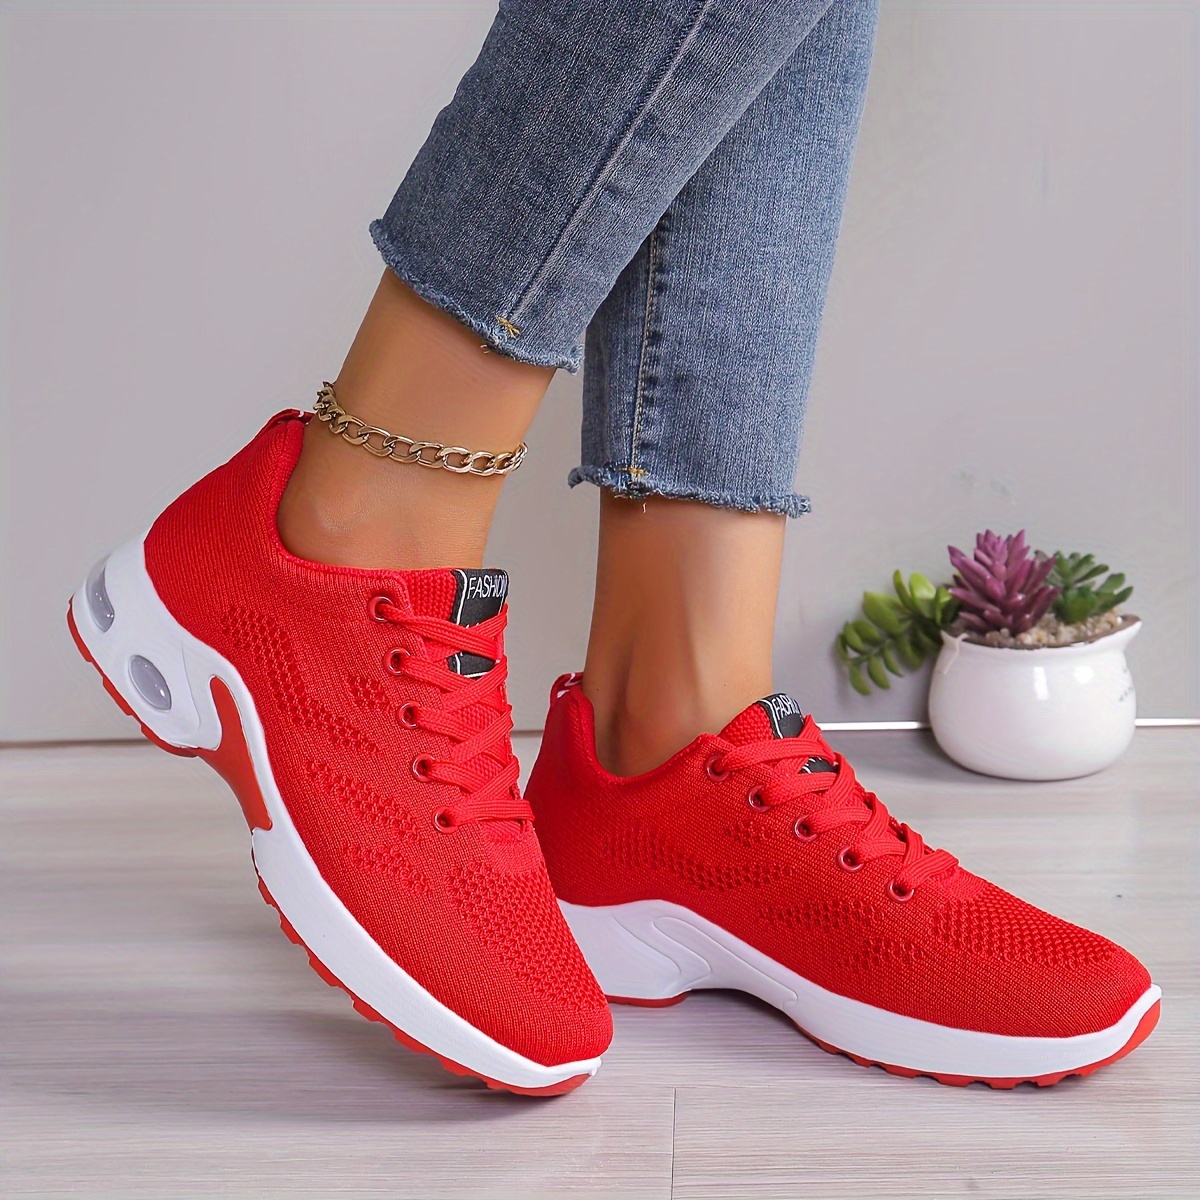 sports shoes women s air cushion comfortable lace knitted details 2